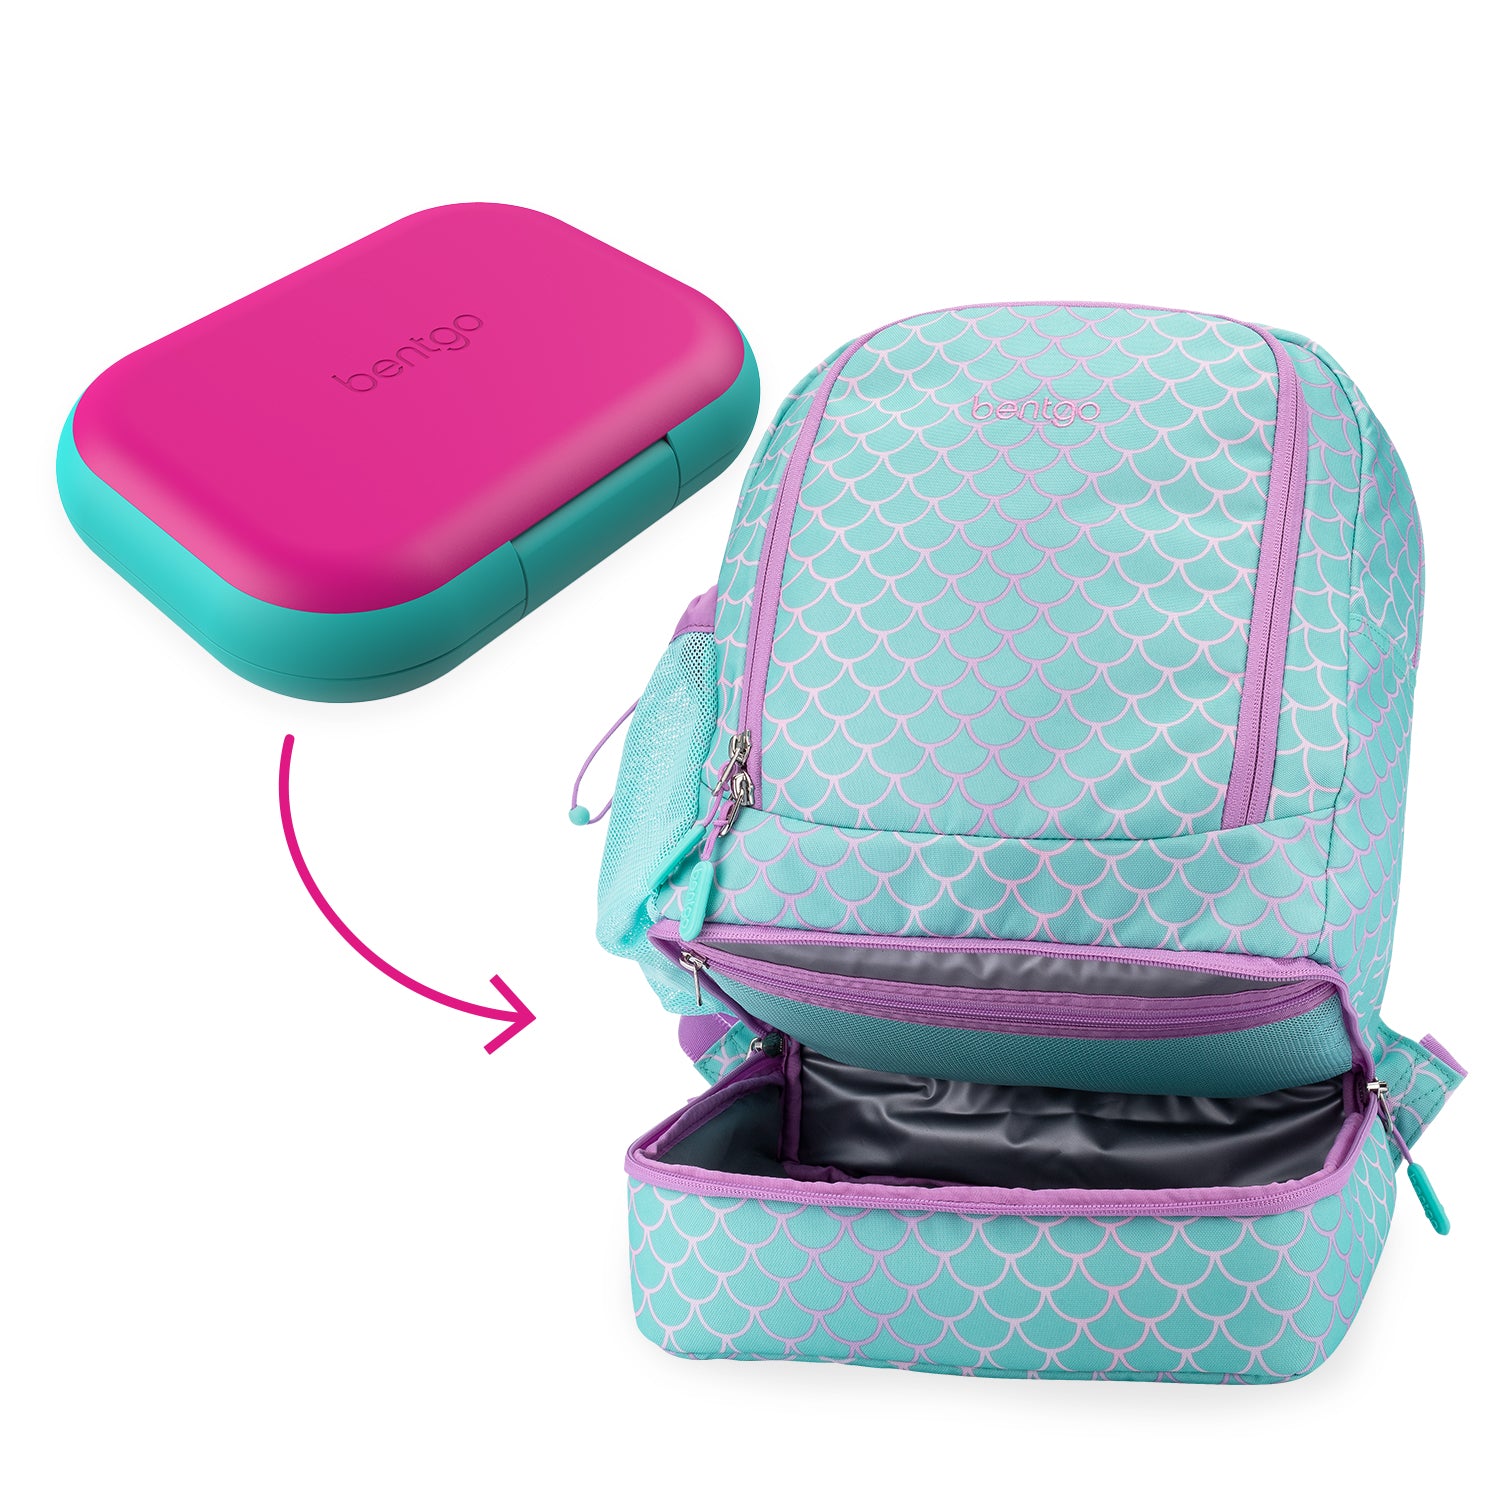 Bentgo Lunch Box Adults  Bentgo Lunchbox - AliExpress with free